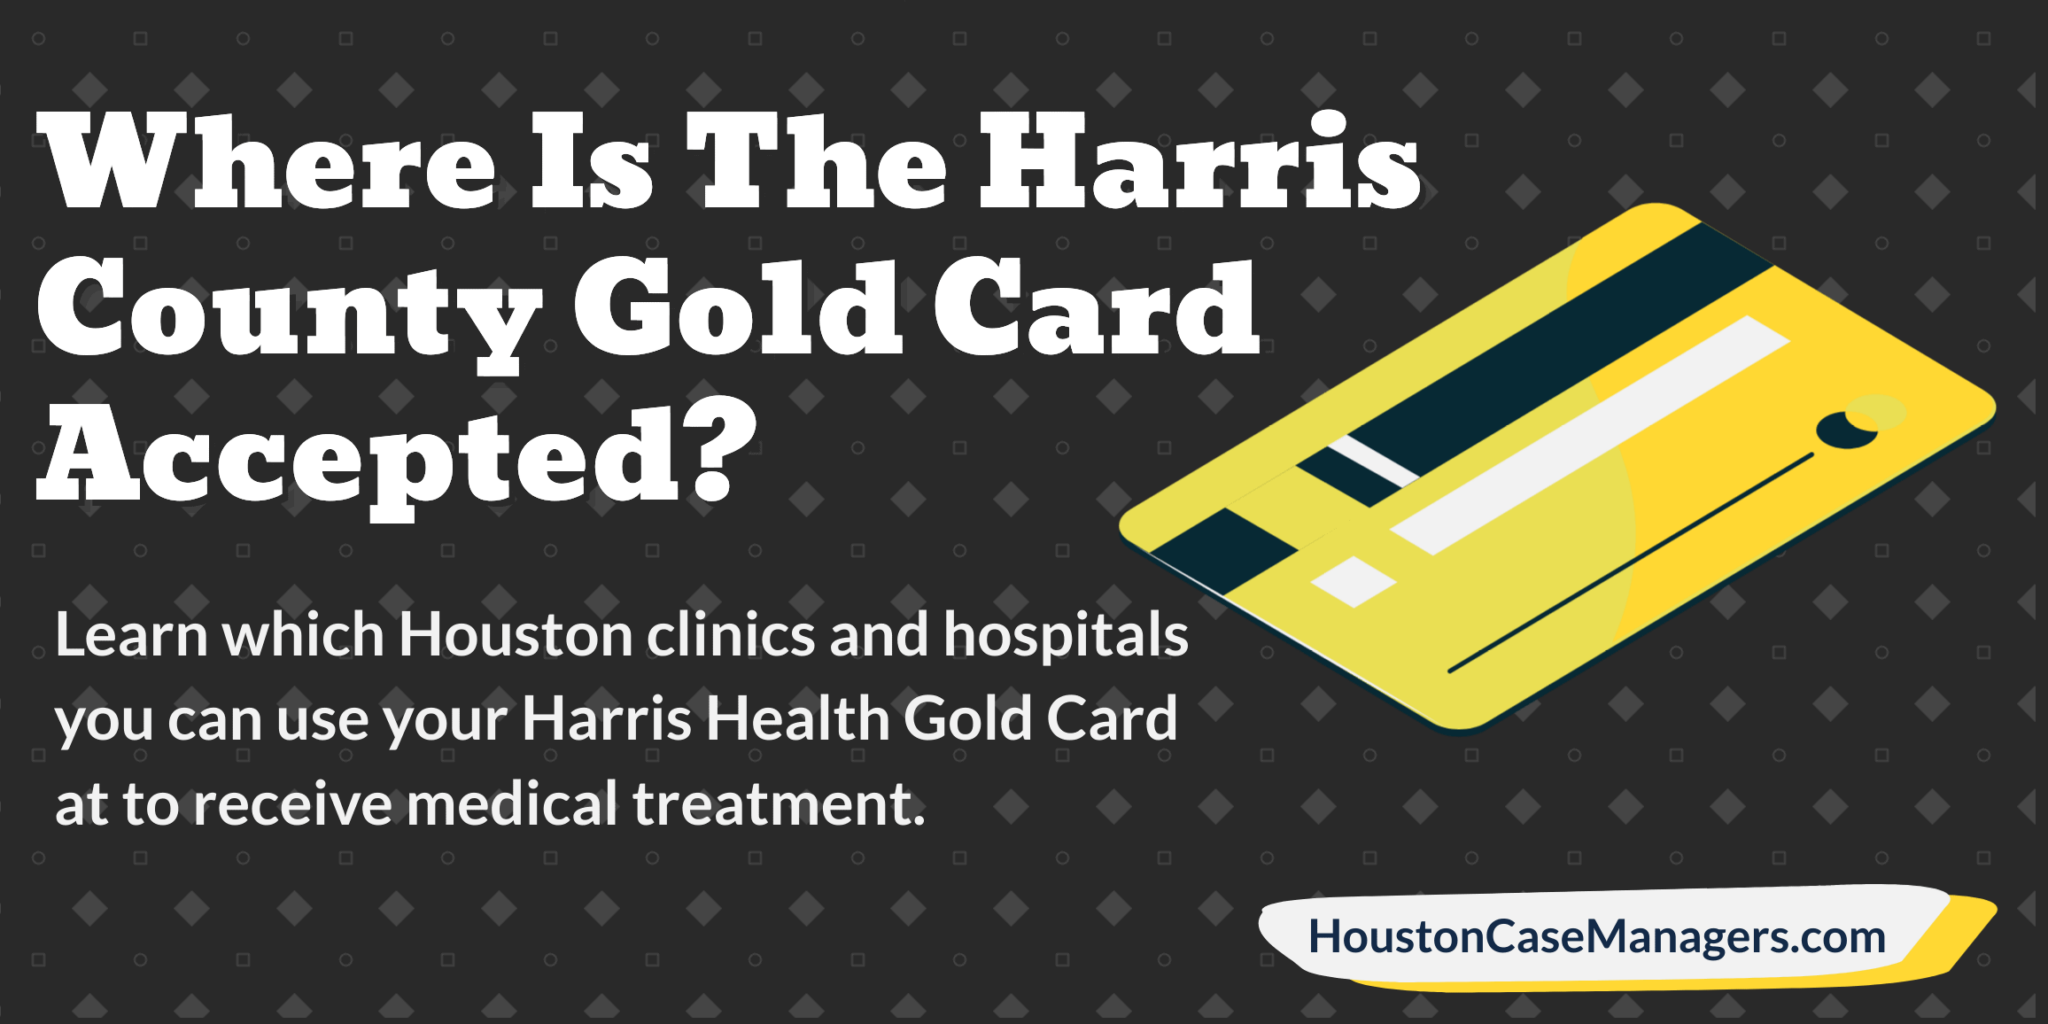 Where Is The Harris County Gold Card Accepted? Find Gold Card Clinics